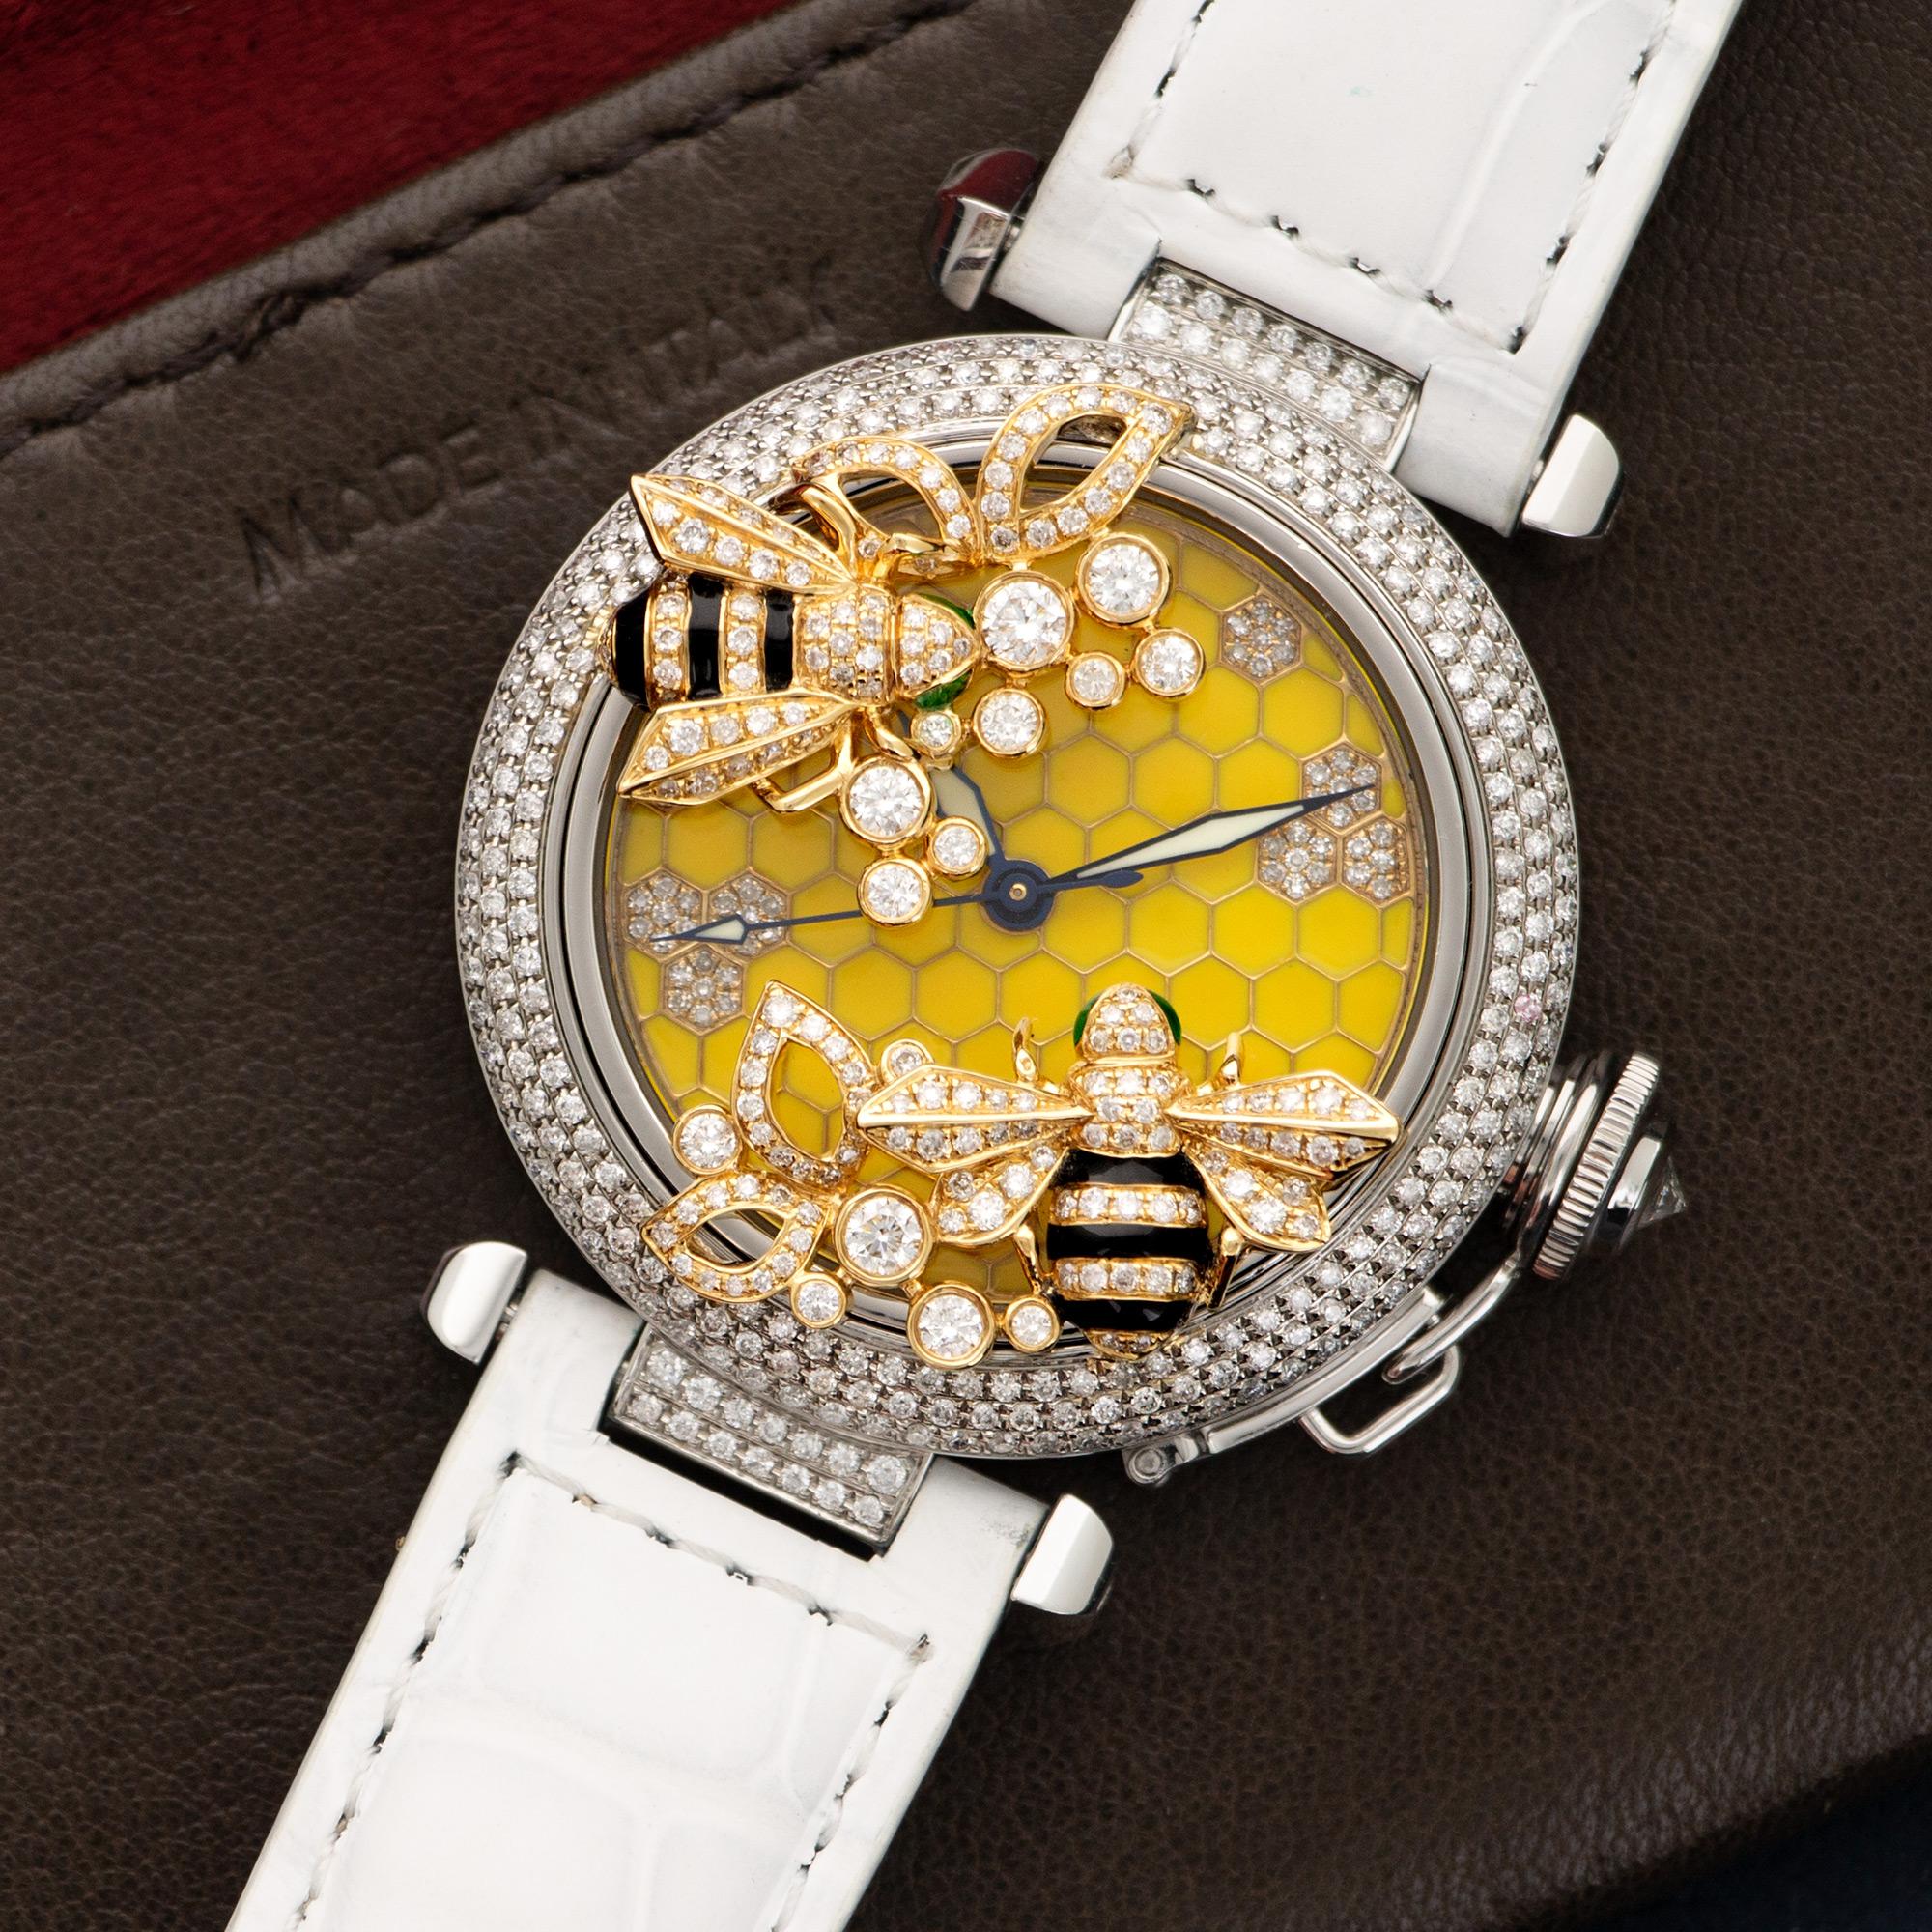 A Cartier Pasha With Custom Diamond and Enamel Work in the motif of Bumble Bees. Inspired by the 